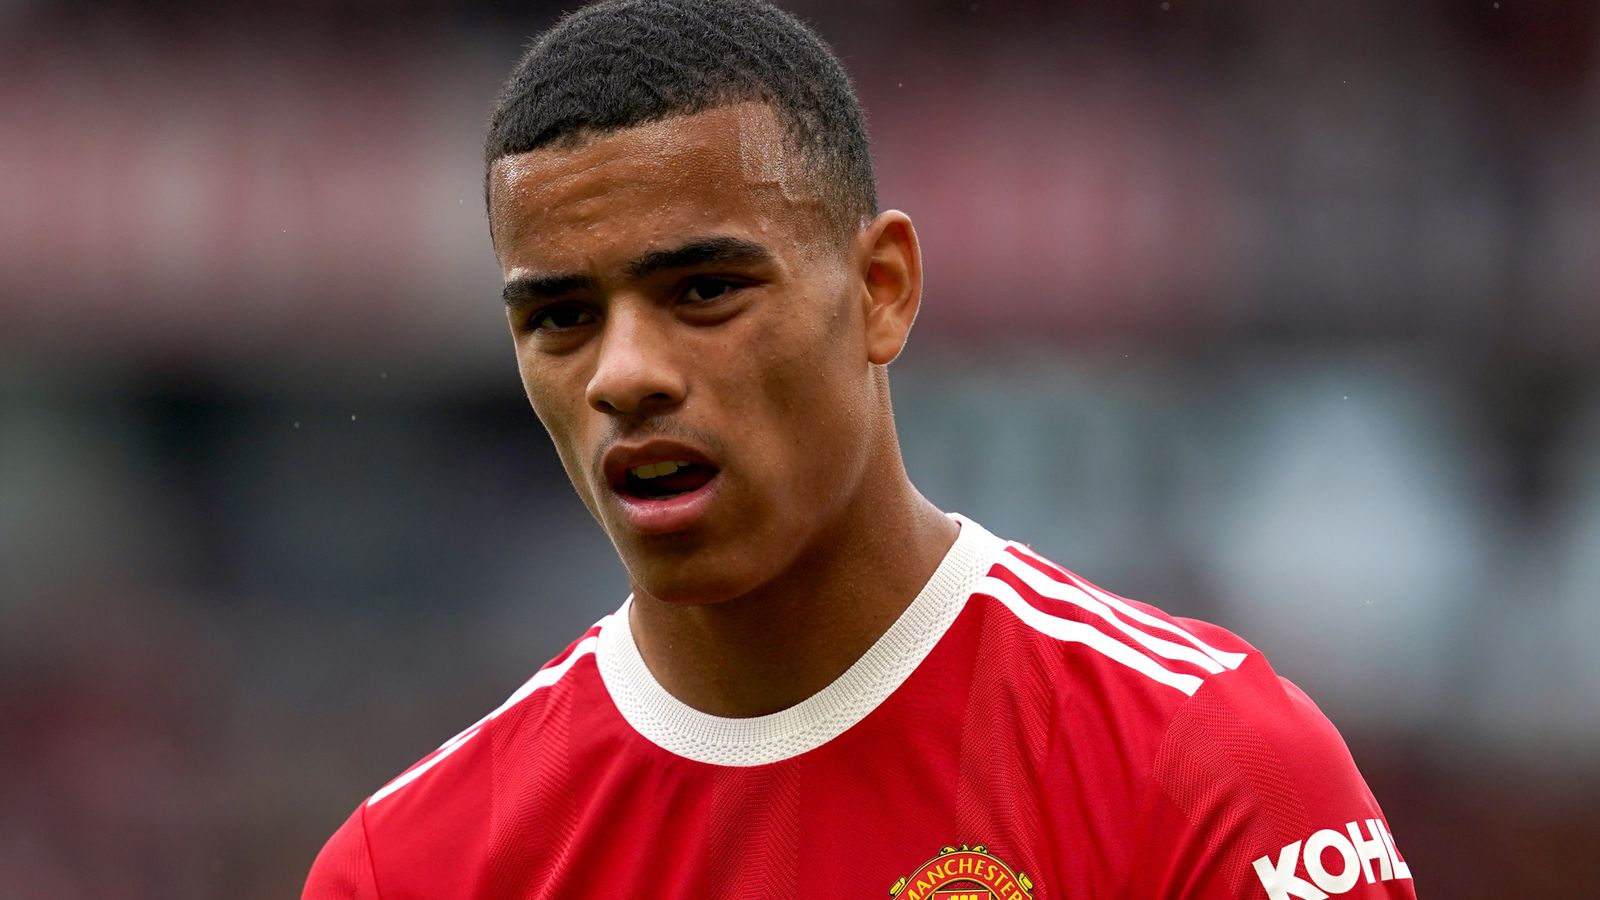 Update: Attempted rape and sexual assault charges against Manchester United footballer, Mason Greenwood, dropped